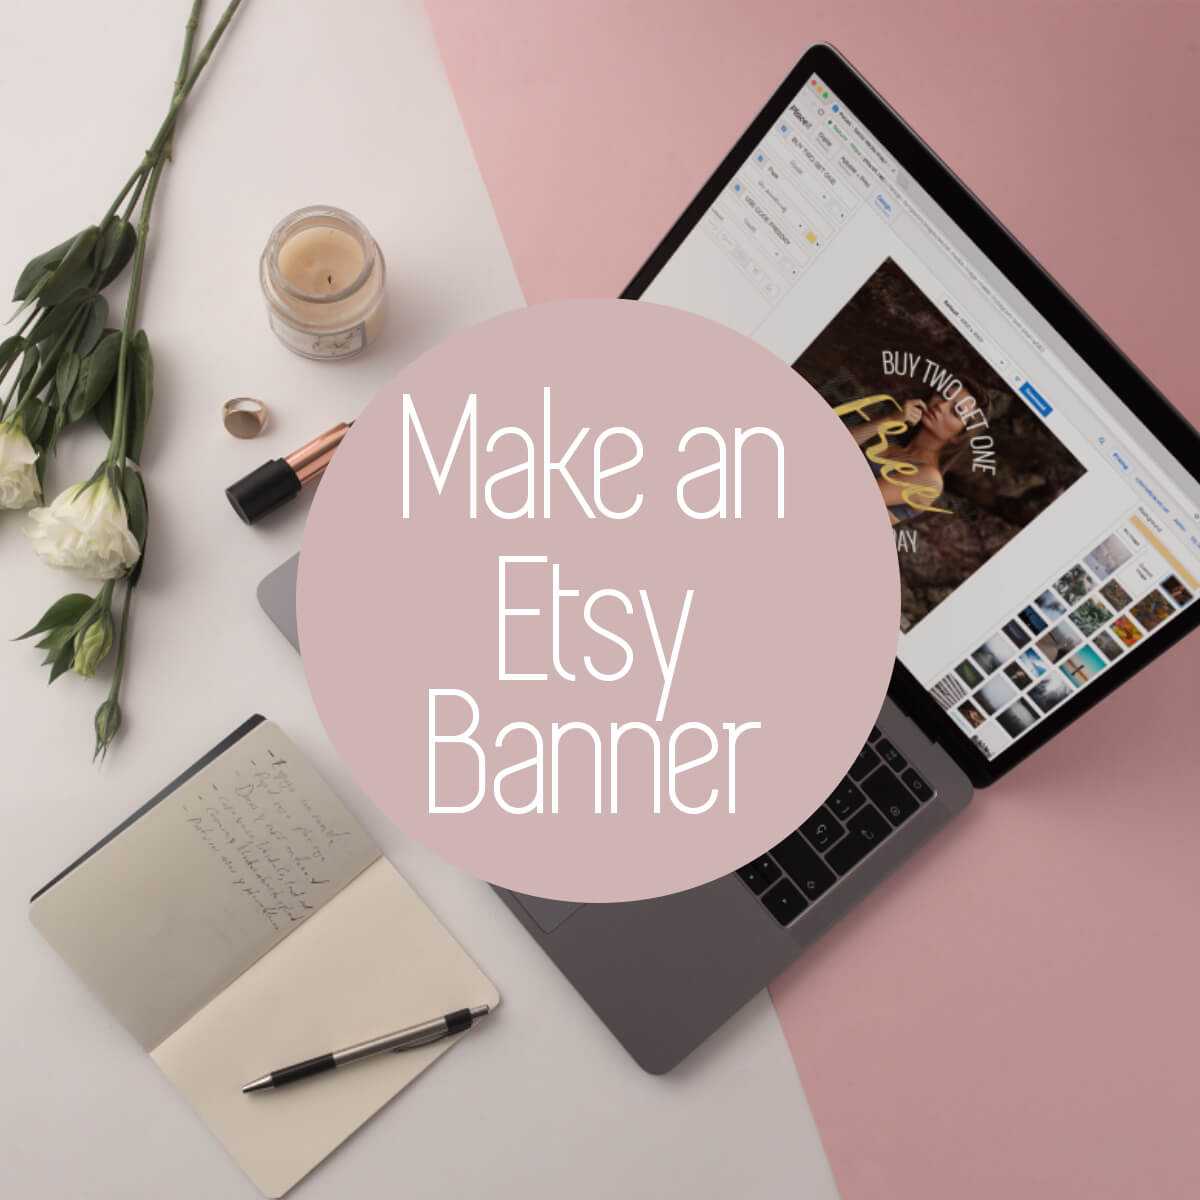 Personalize Your Etsy Shop - Cover Photos And Banners For Free Etsy Banner Template